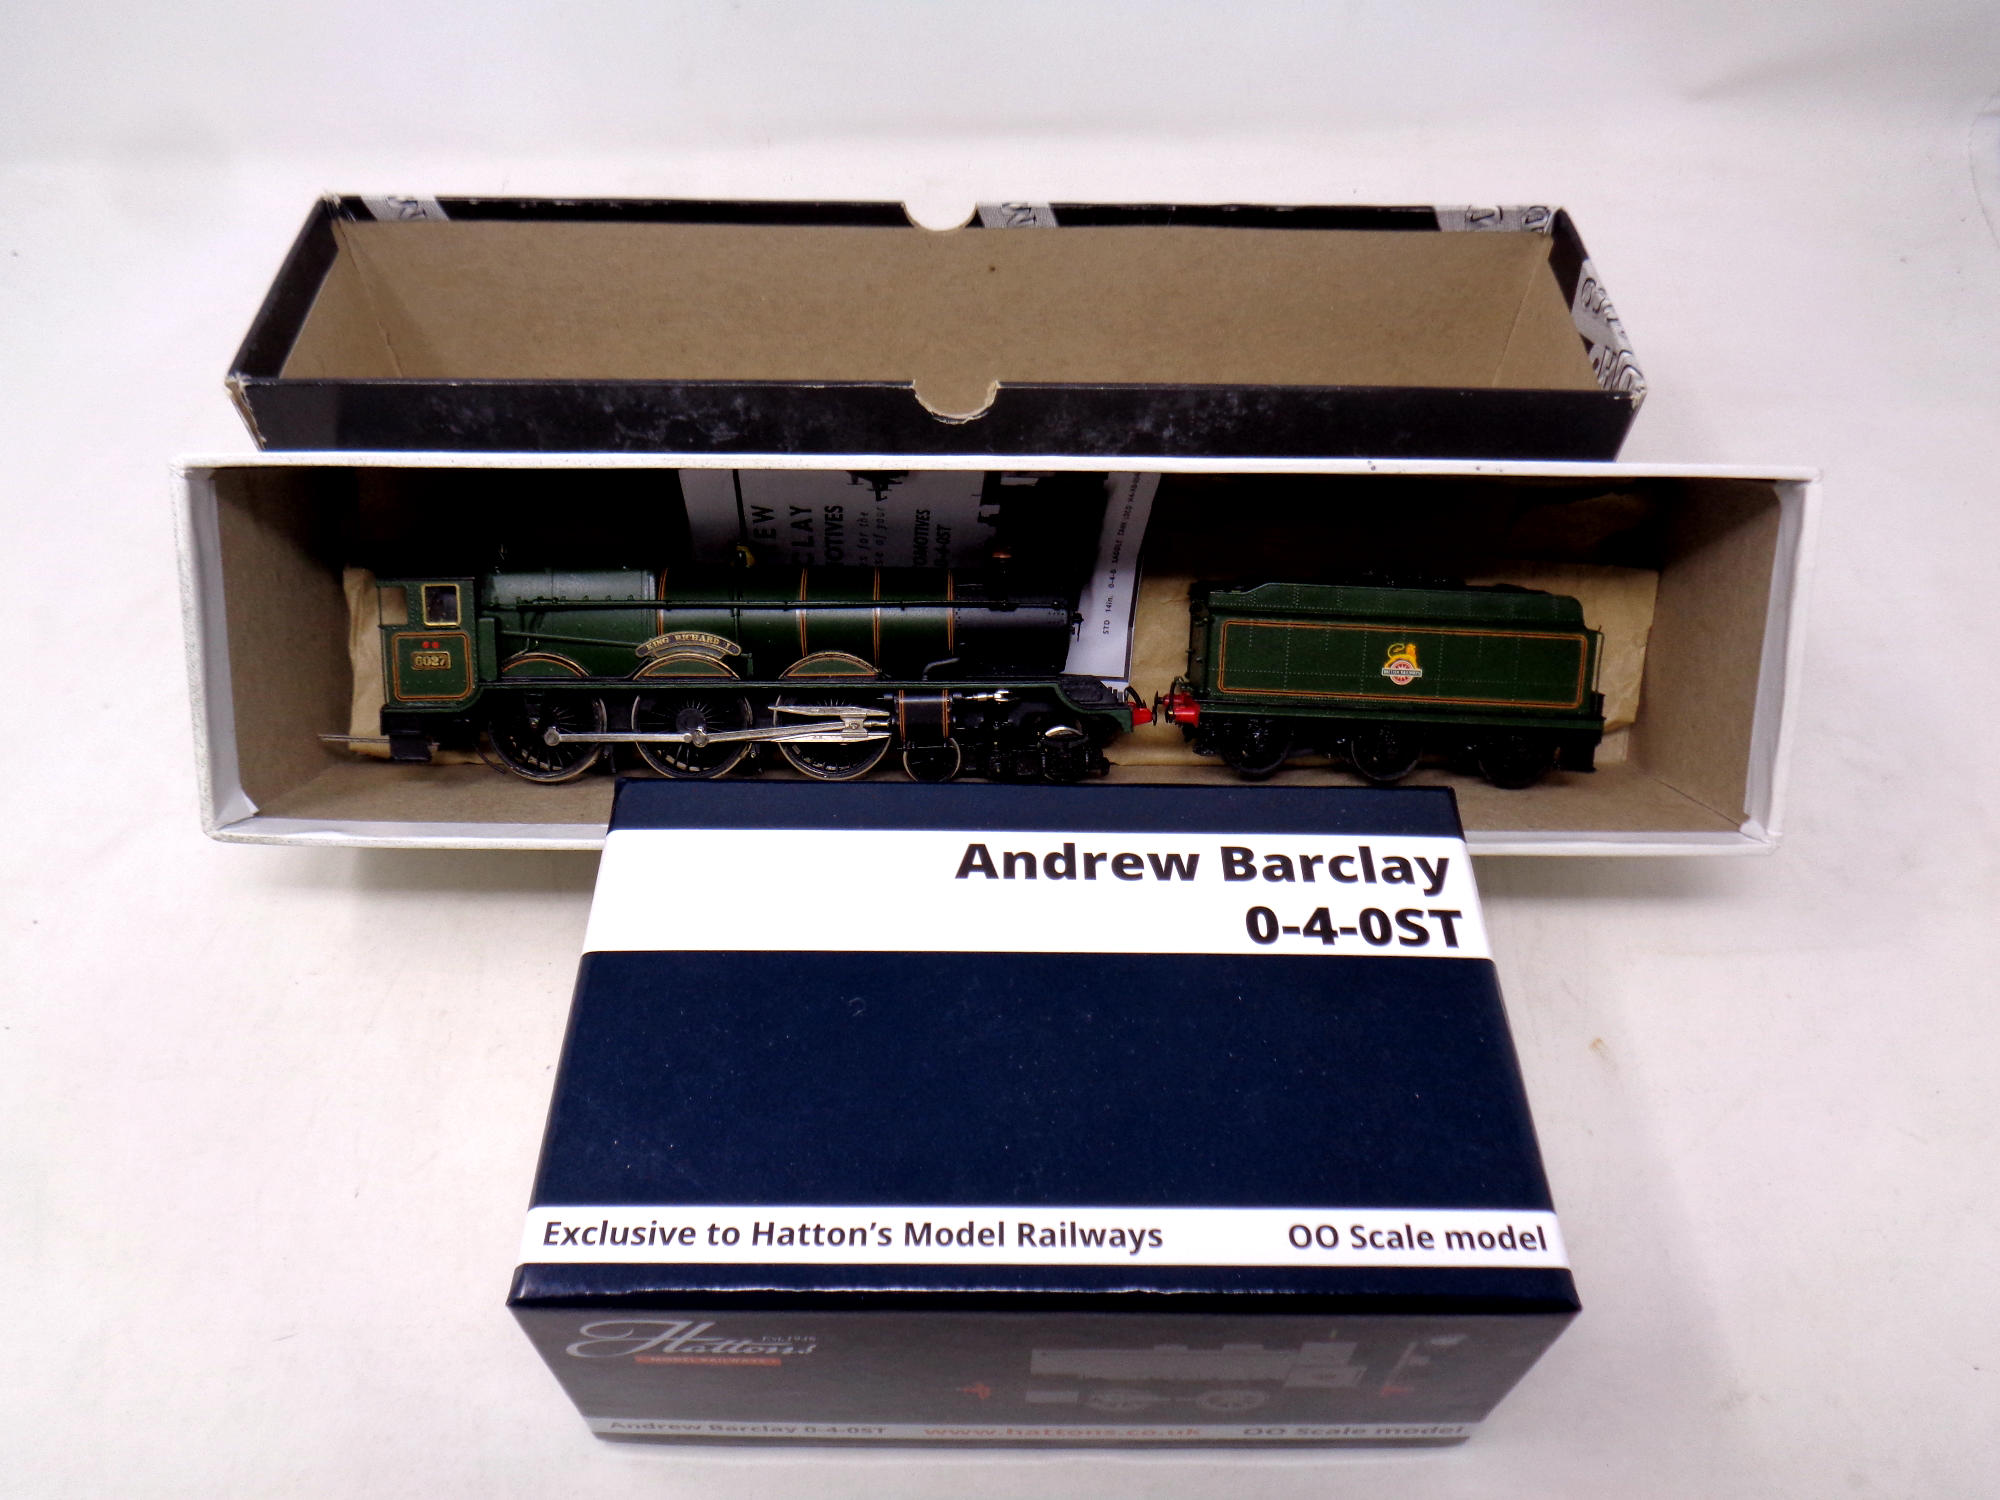 An Andrew Barclay 0-4-0 ST 00 Scale locomotive together with a further locomotive King Richard with